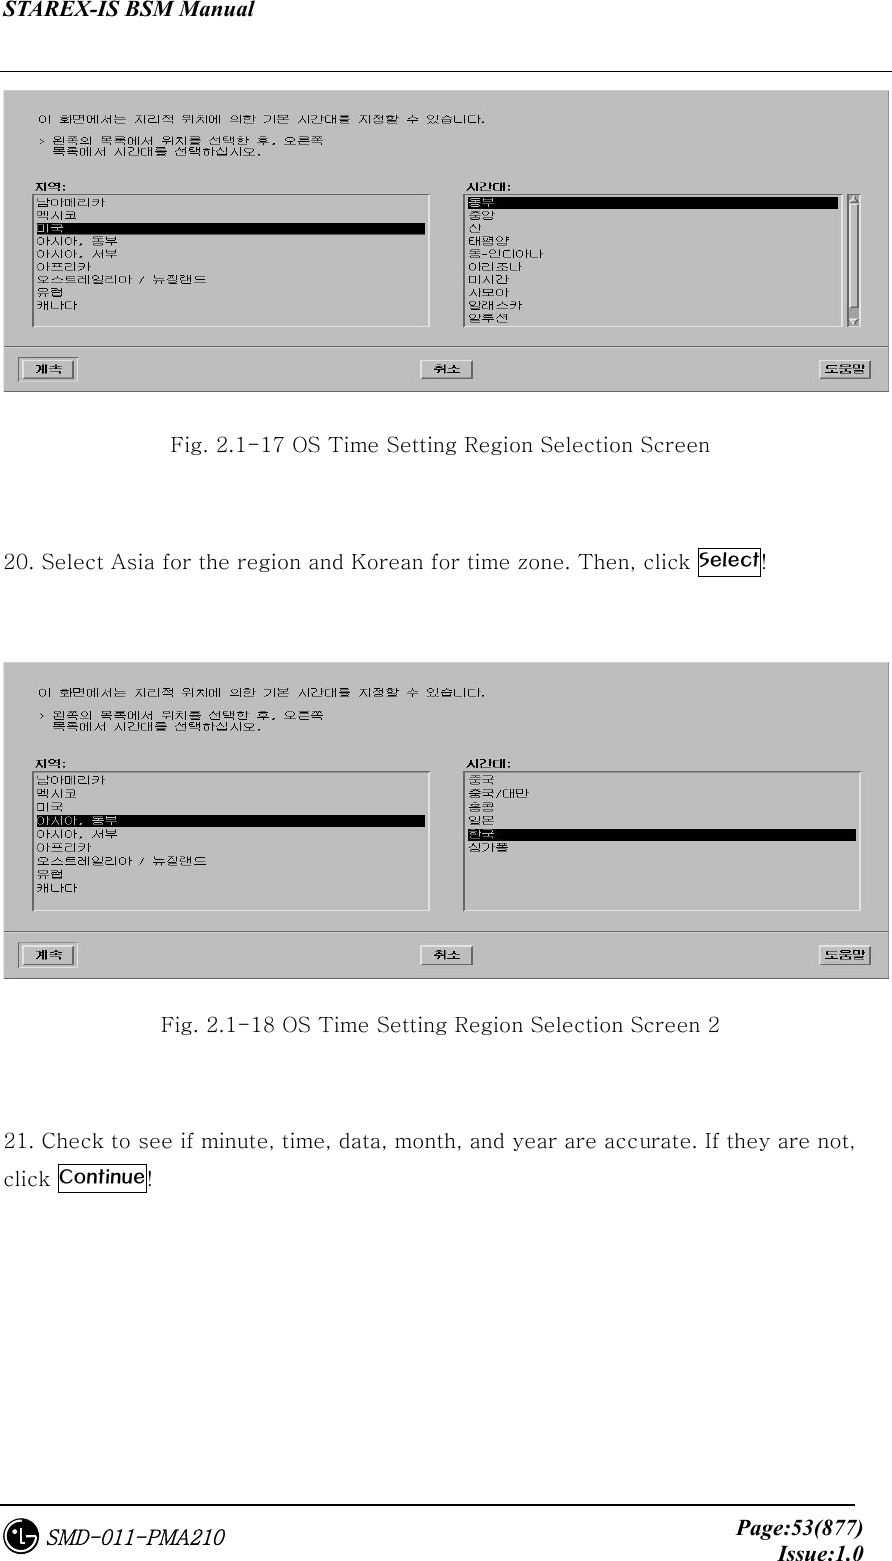 STAREX-IS BSM Manual     Page:53(877)Issue:1.0SMD-011-PMA210  Fig. 2.1-17 OS Time Setting Region Selection Screen  20. Select Asia for the region and Korean for time zone. Then, click Select!   Fig. 2.1-18 OS Time Setting Region Selection Screen 2  21. Check to see if minute, time, data, month, and year are accurate. If they are not, click Continue! 